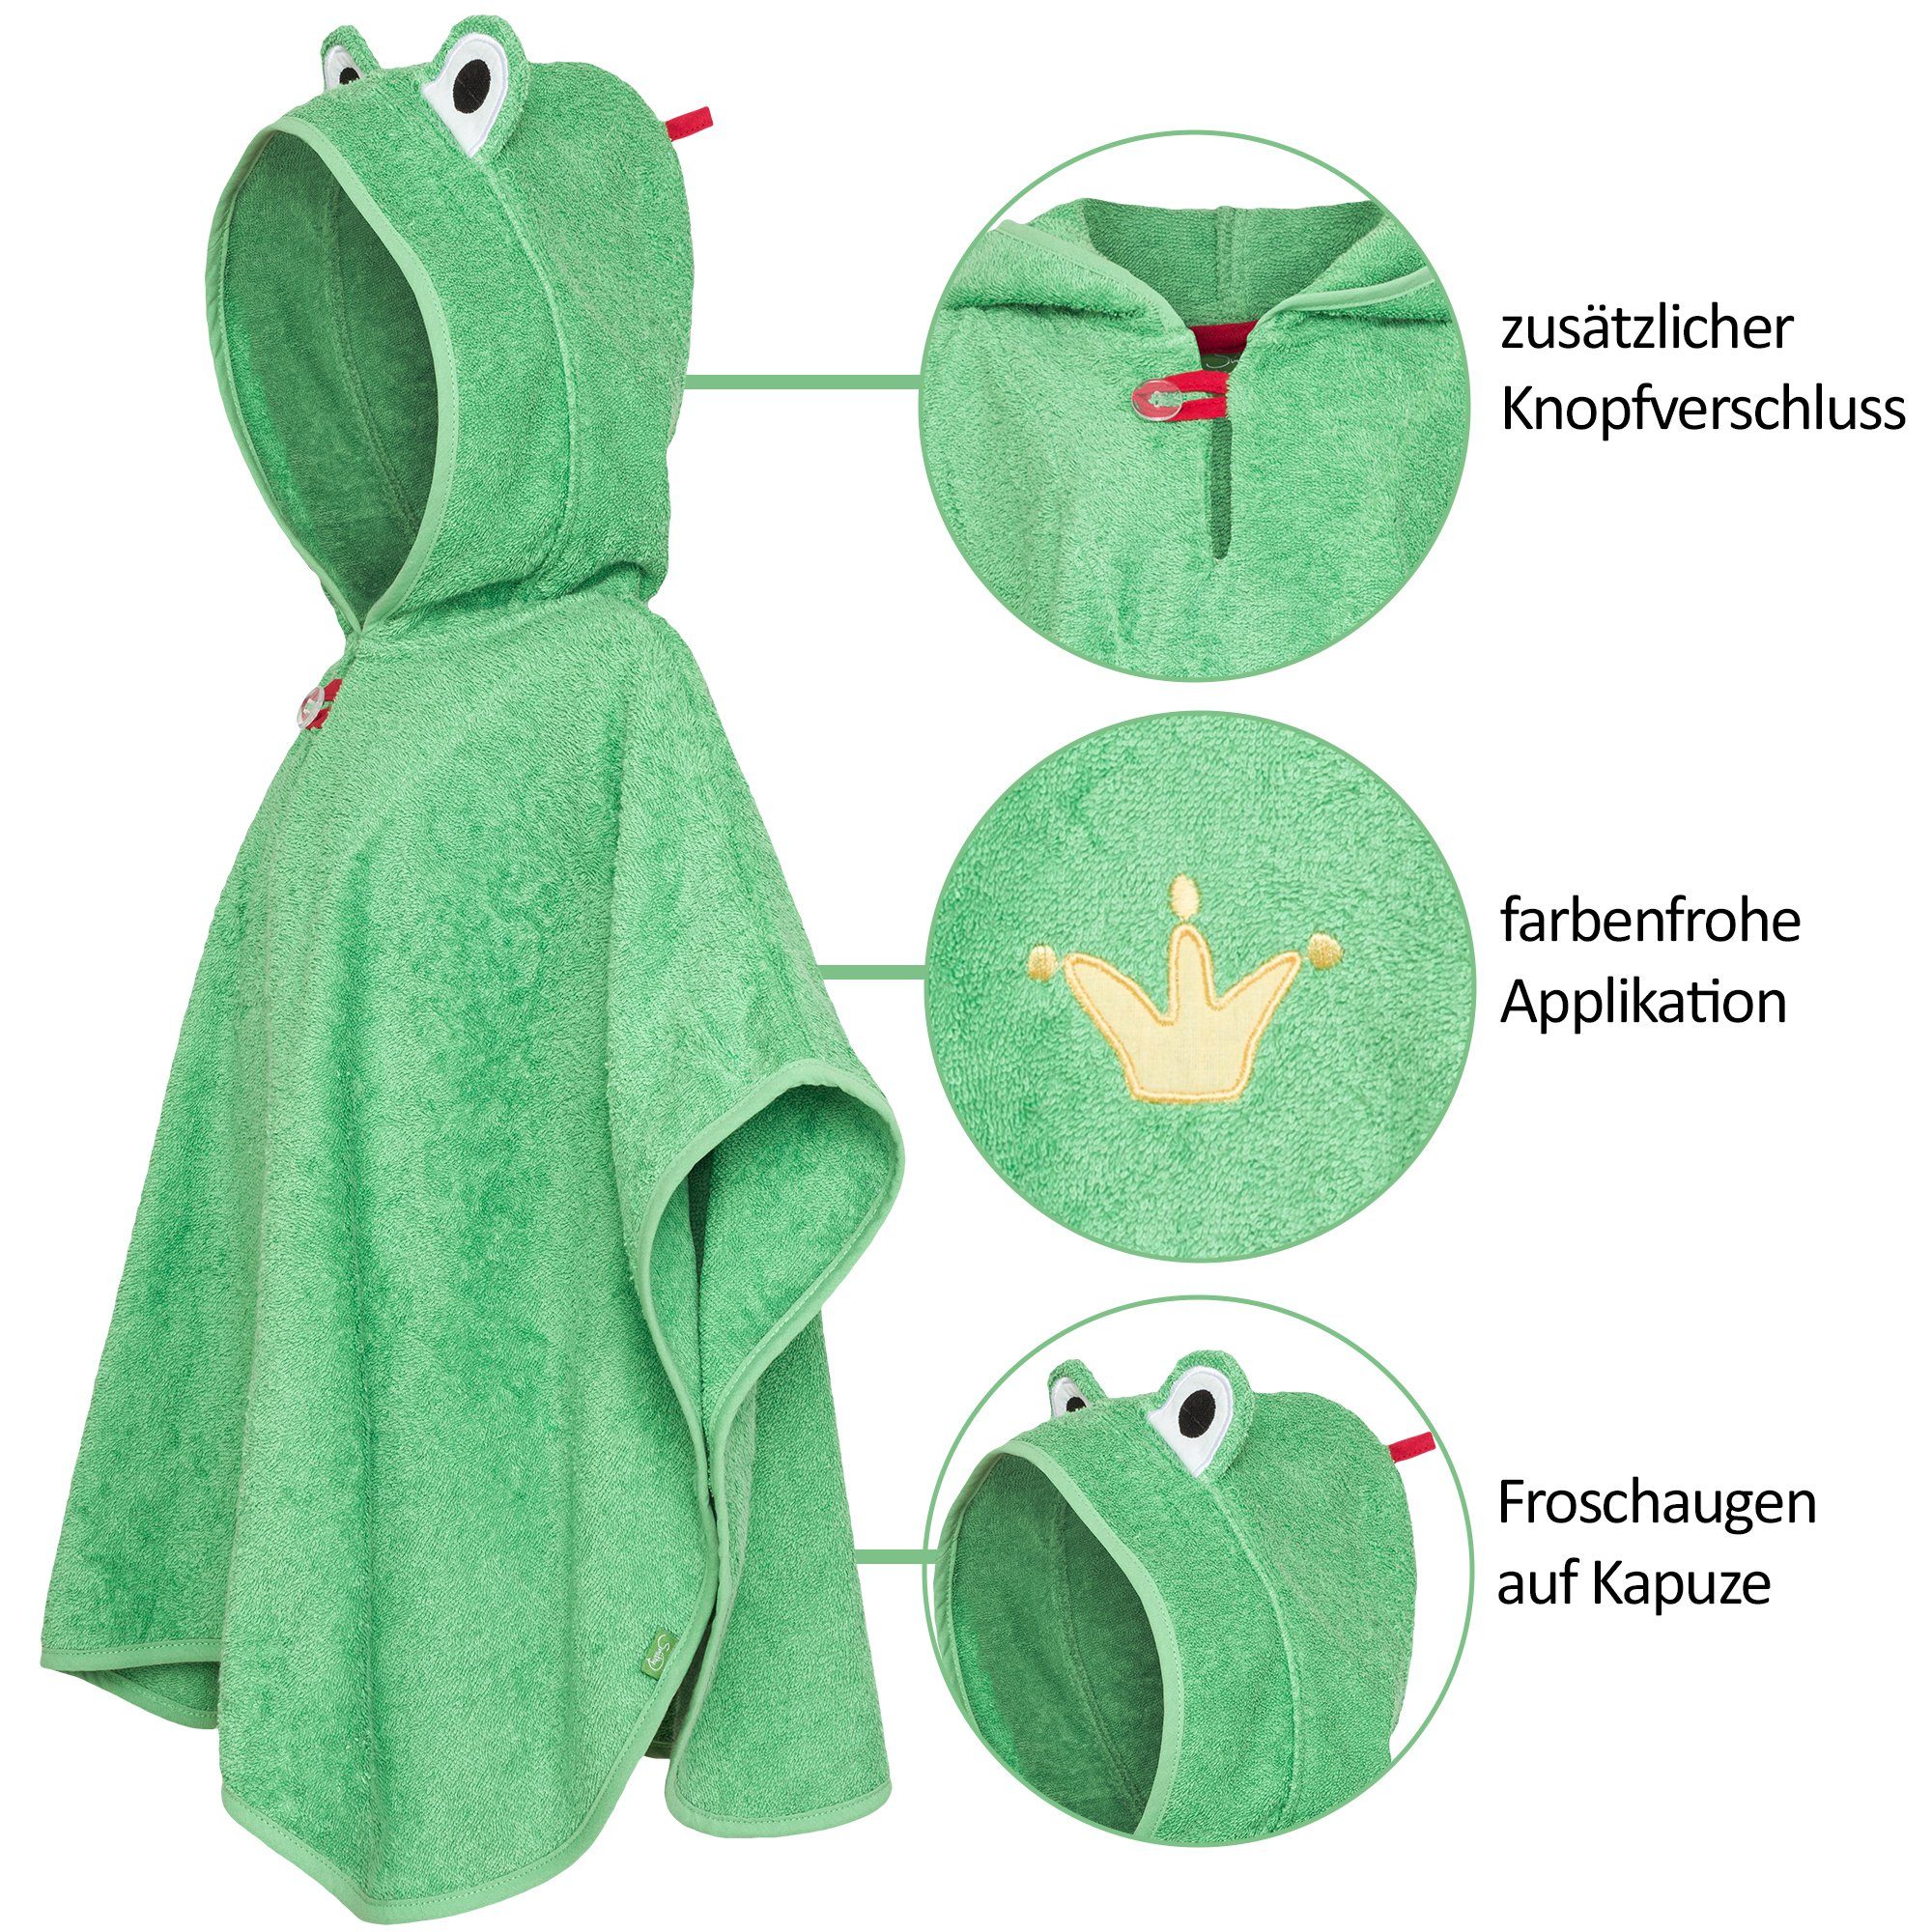 Smithy Badeponcho Baby Europe Frottee, made grün, Frosch, Armloch, am Frottee, Knöpfe in